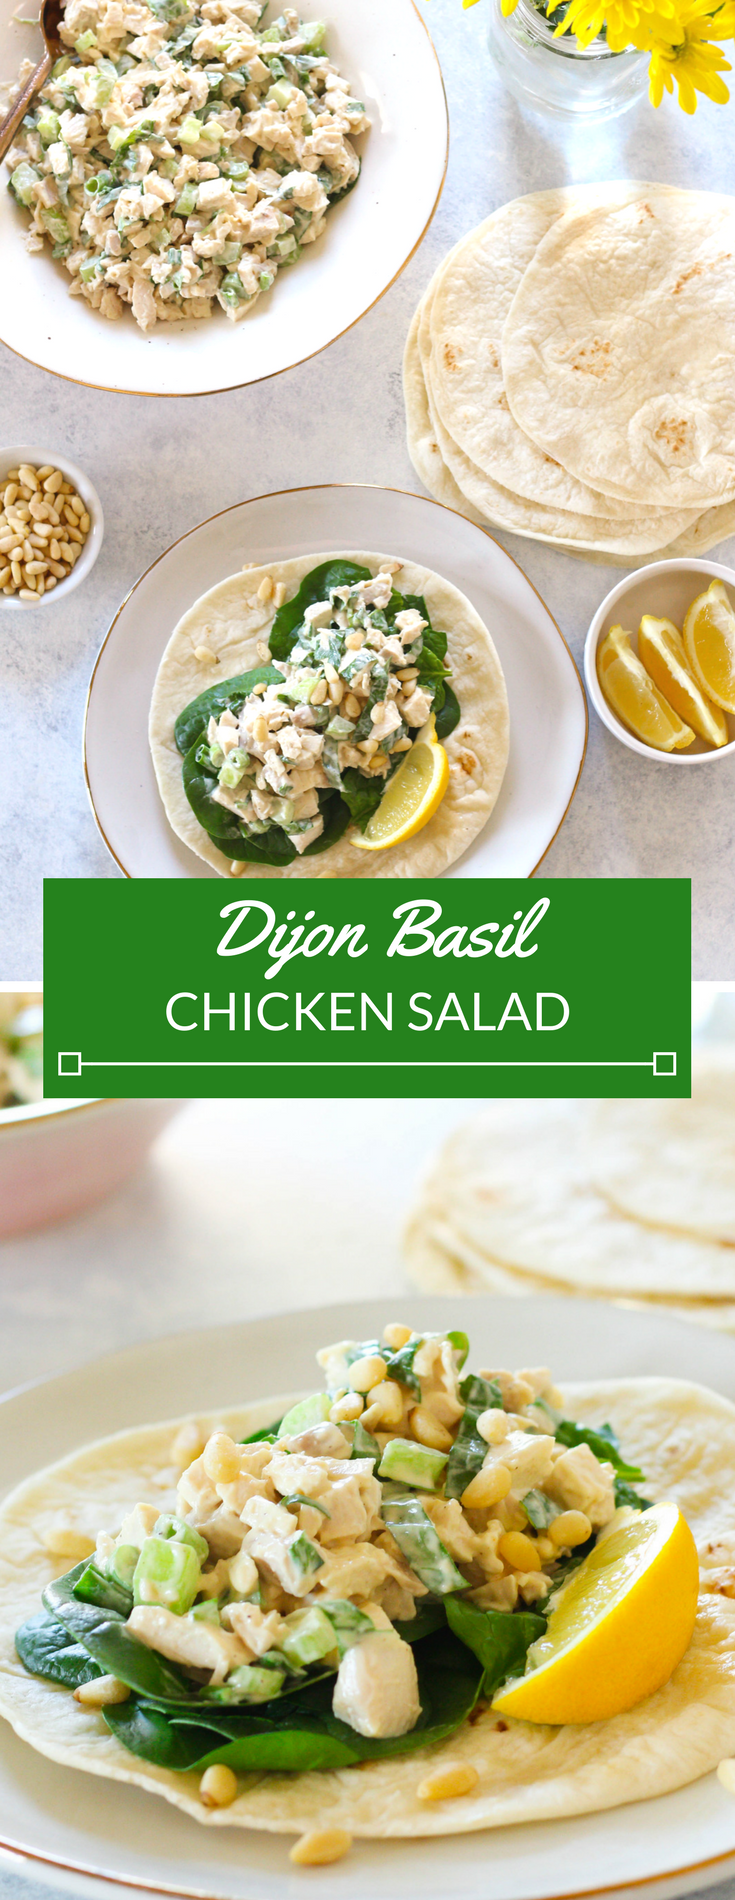  Diced rotisserie chicken combined with mayo, lemon juice, Dijon mustard and basil to create a delicious dijon basil chicken salad, perfect to eat as a salad or on top of your favorite bread or roll!